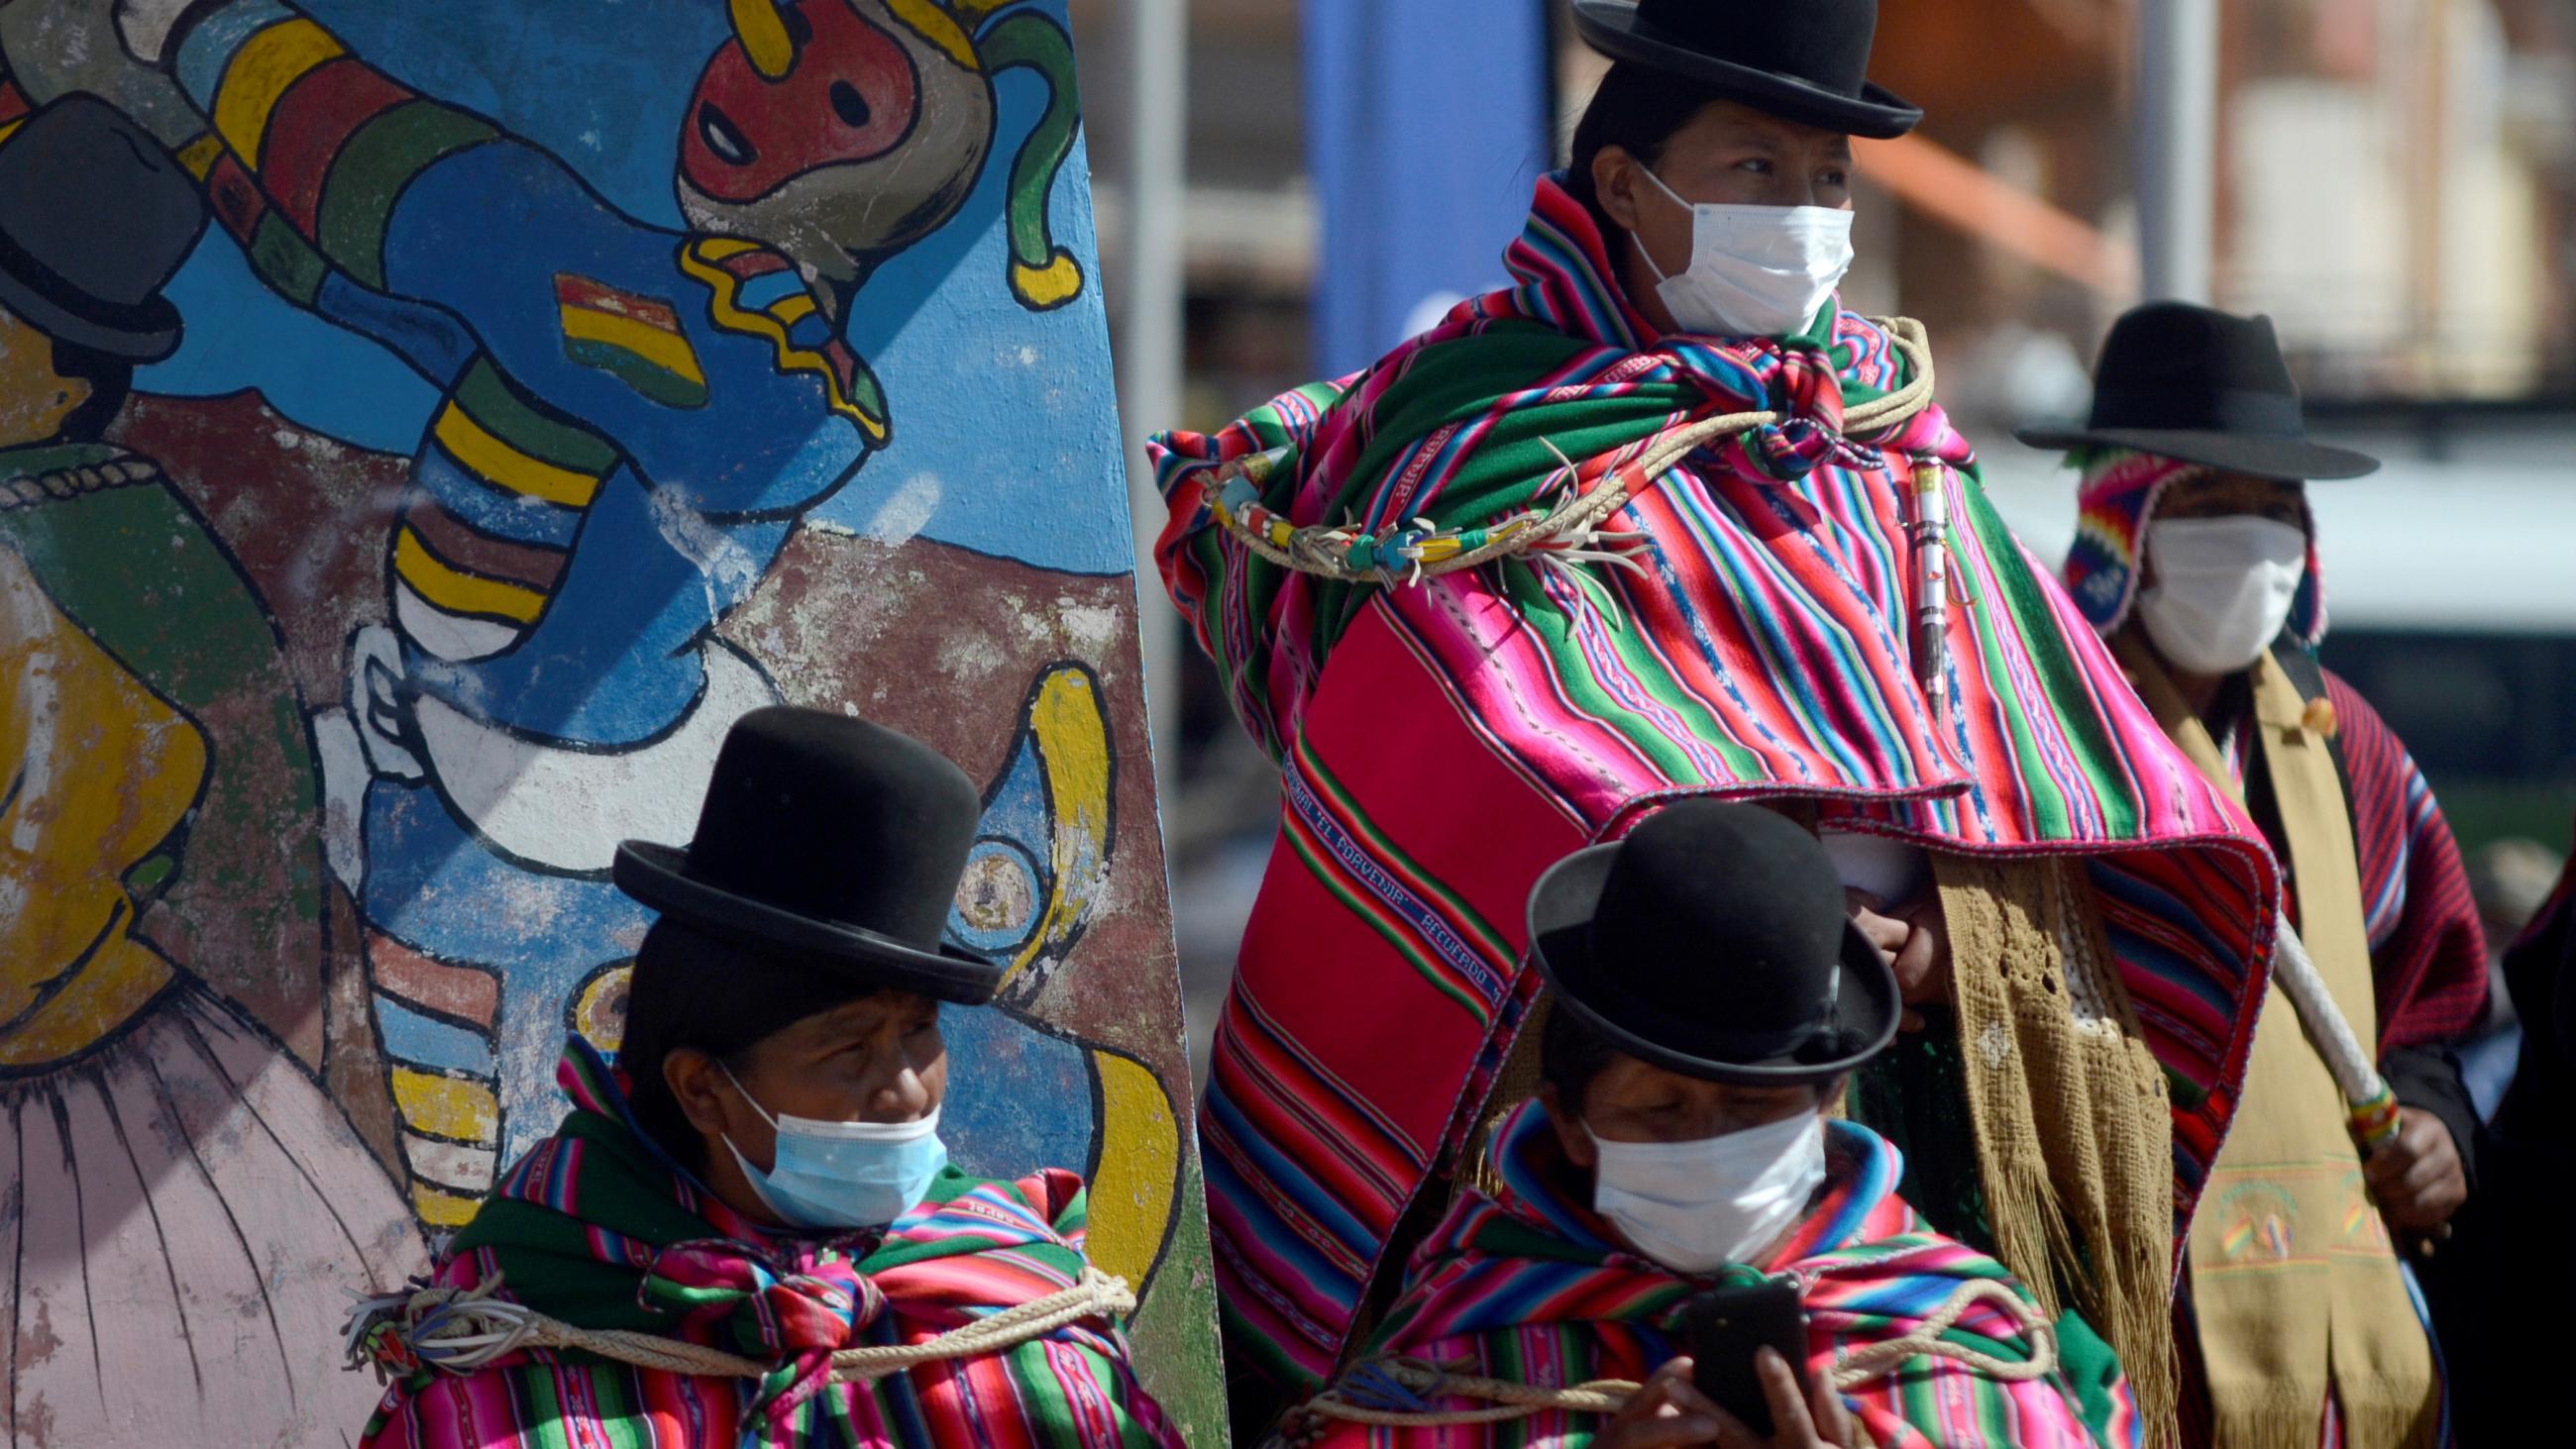 Bolivian women in traditional dress stand in front of a brightly colored mural near a site where people receive COVID-19 vaccines in Desaguadero, Bolivia.